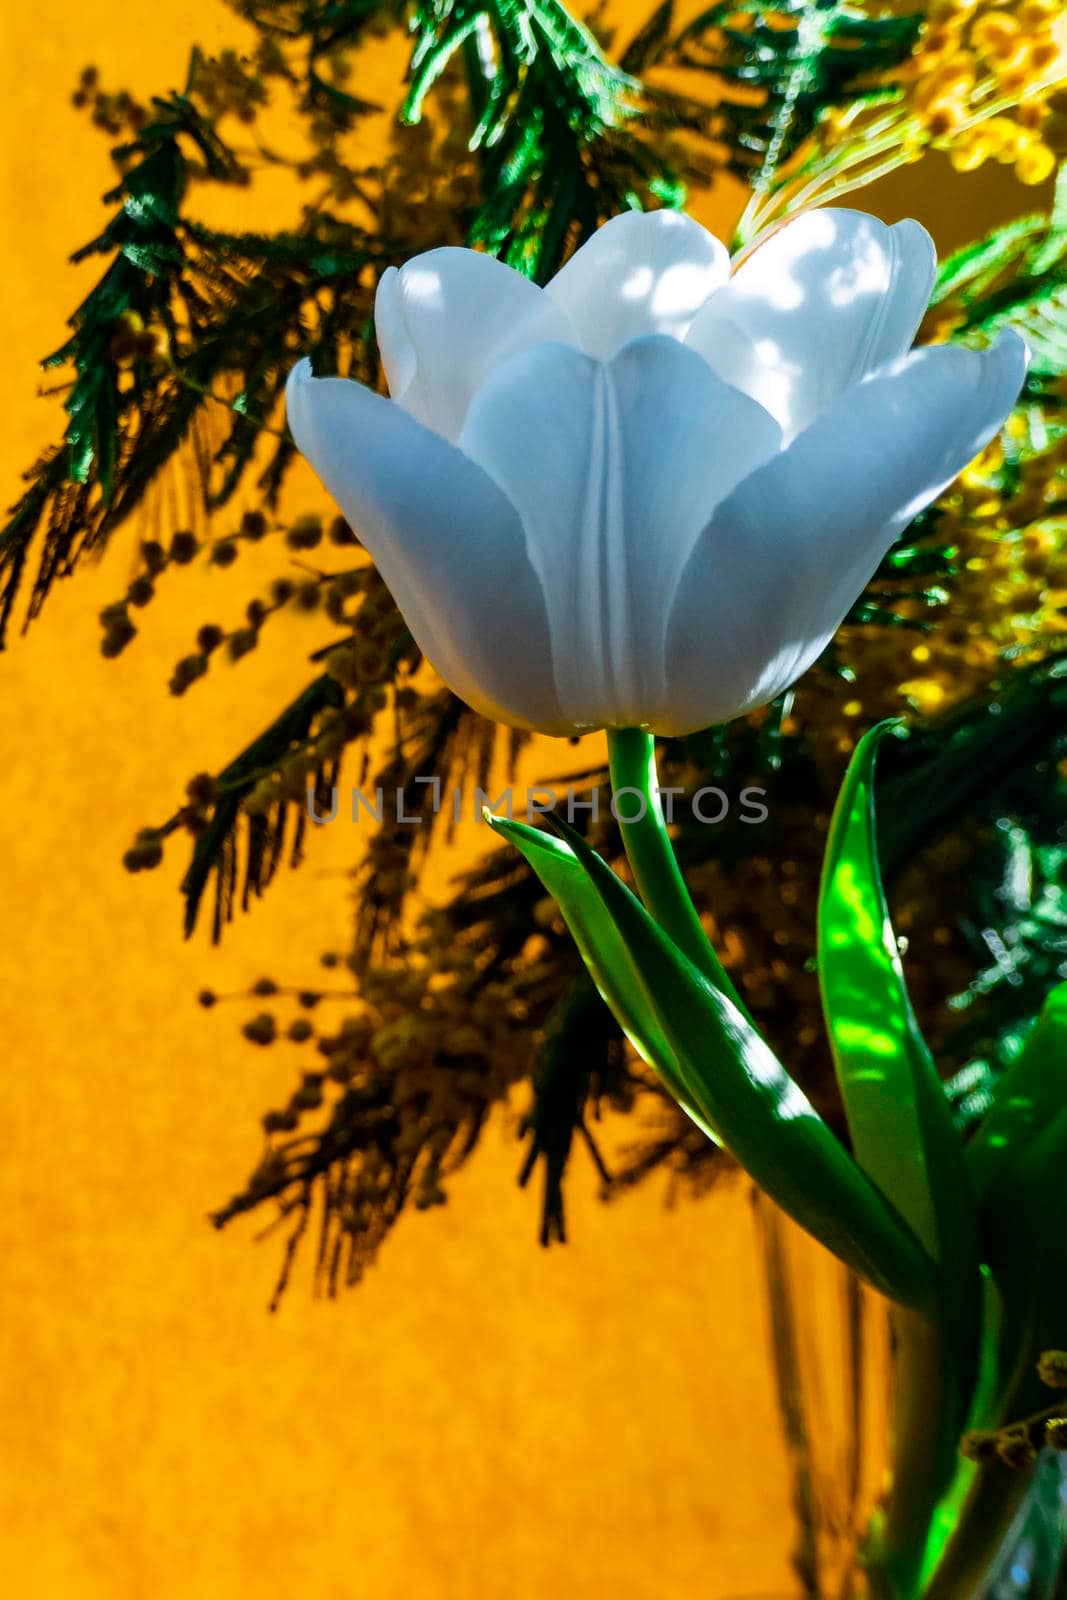 spring greeting card with flowers: white tulips and mimosa on a orange or yellow background. The concept of sunny spring, tenderness, femininity.